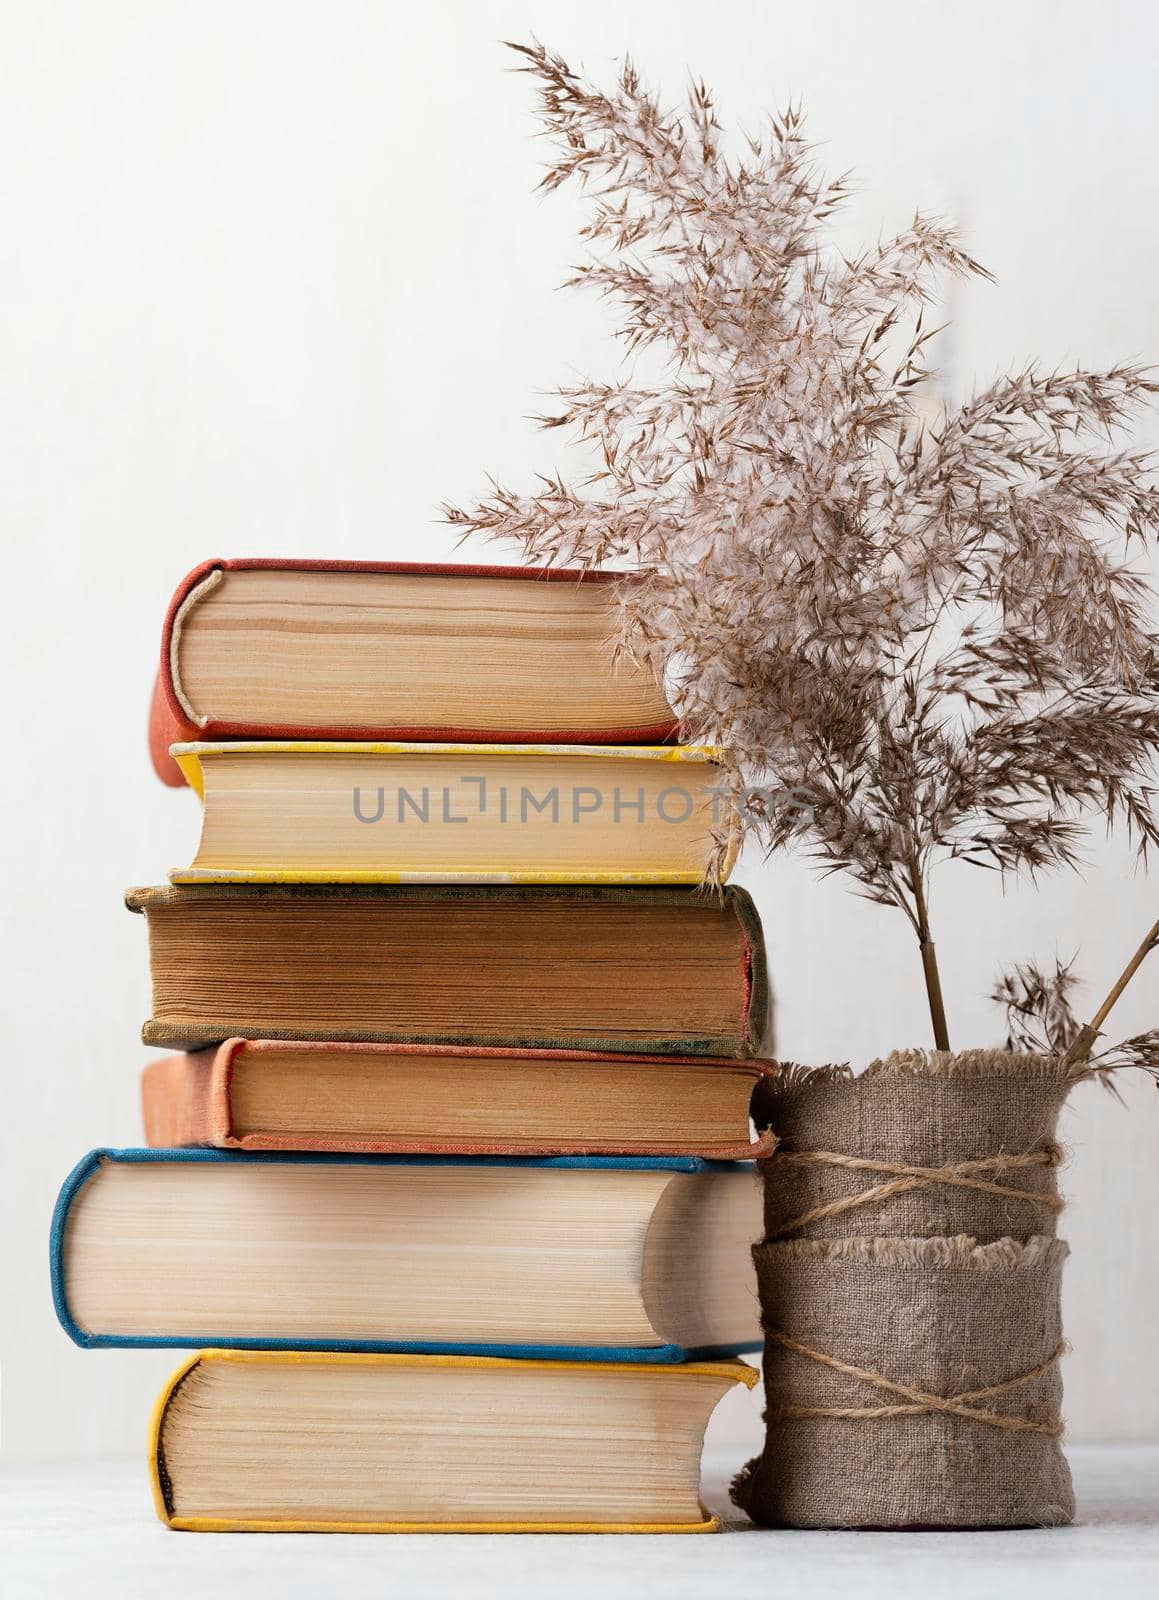 front view stack books with vase flowers. High quality photo by Zahard